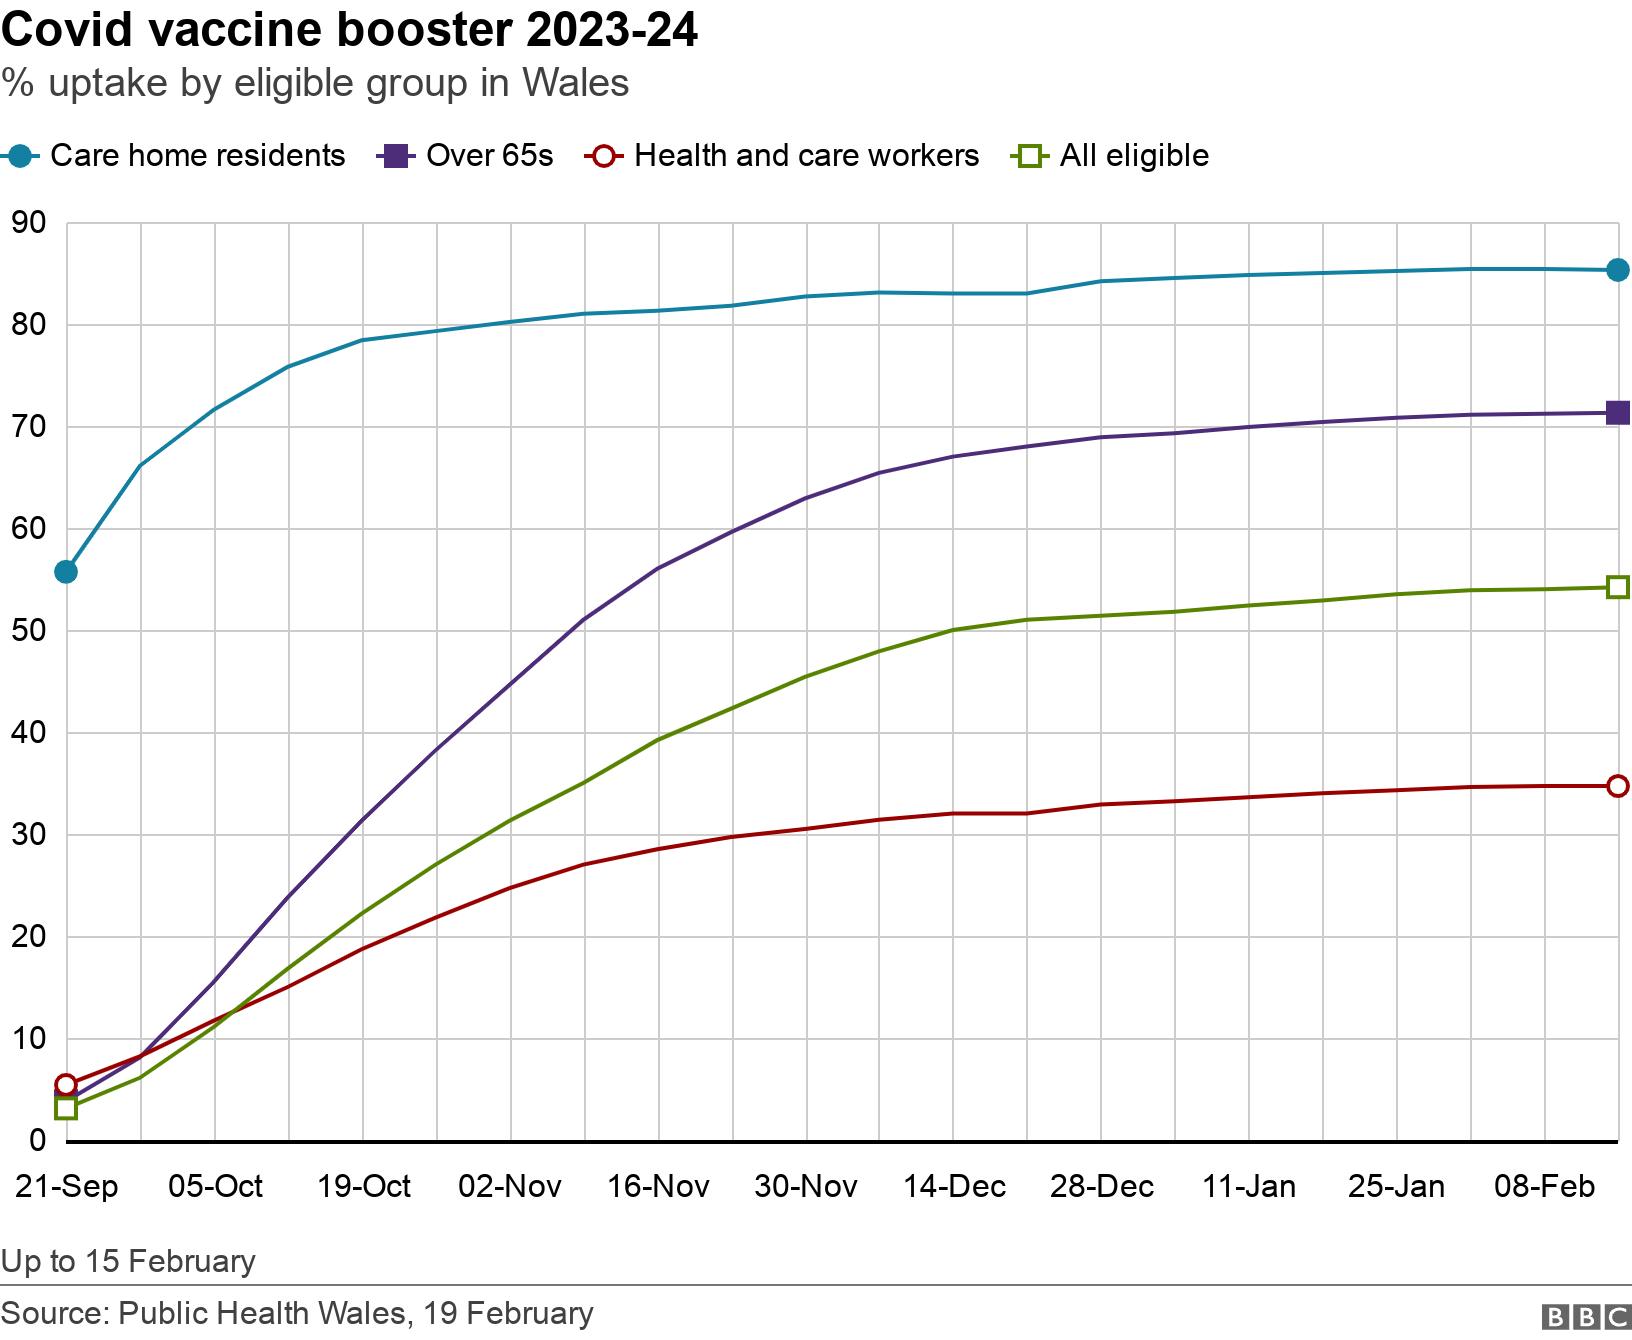 Covid vaccine booster 2023-24. % uptake by eligible group in Wales.  Up to 15 February.